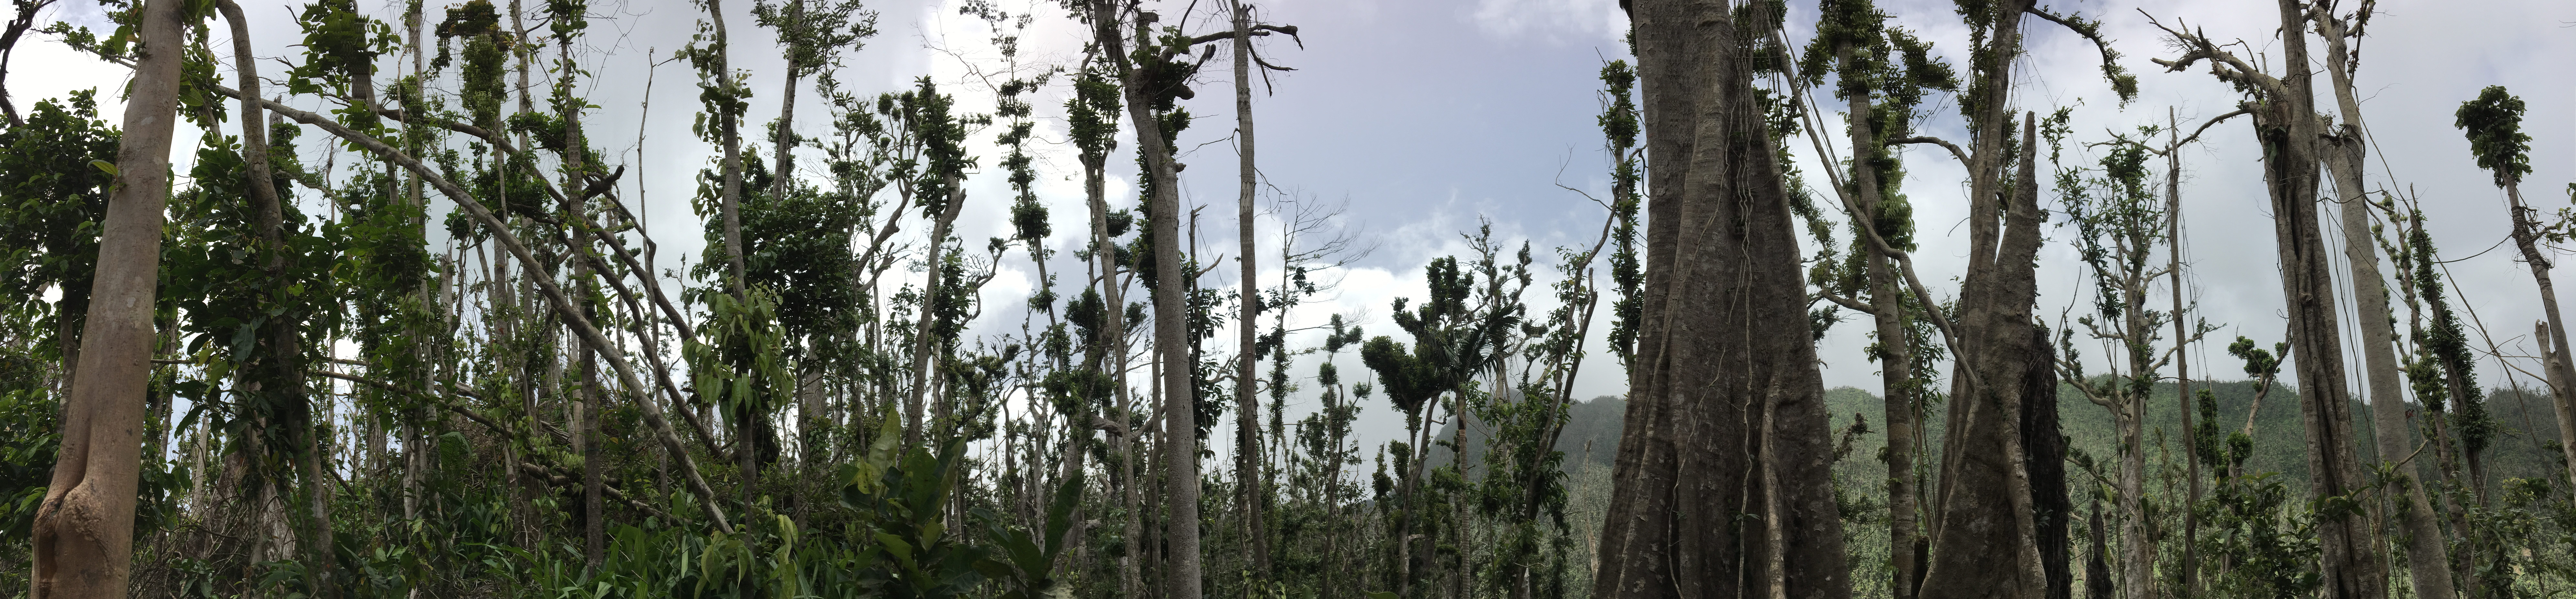 A panoramic photo of a forest in Dominica nine months after Hurricane Maria.